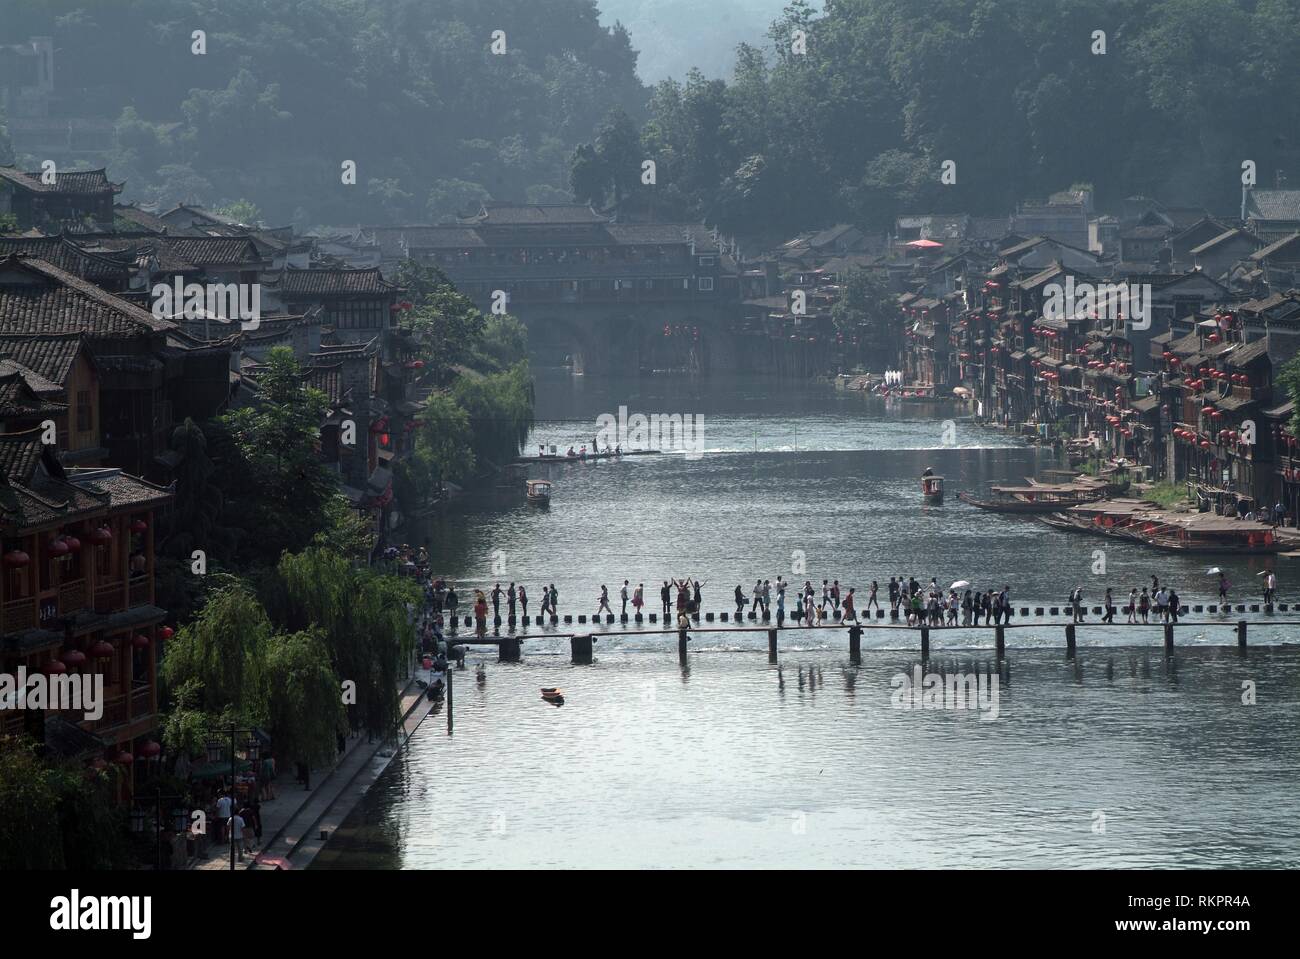 People crossing the Tou Jiang River by stepping stones in Fenghuang. Meaning 'Phoenix' in Chinese, Fenghuang was named after the mythical bird of immo Stock Photo